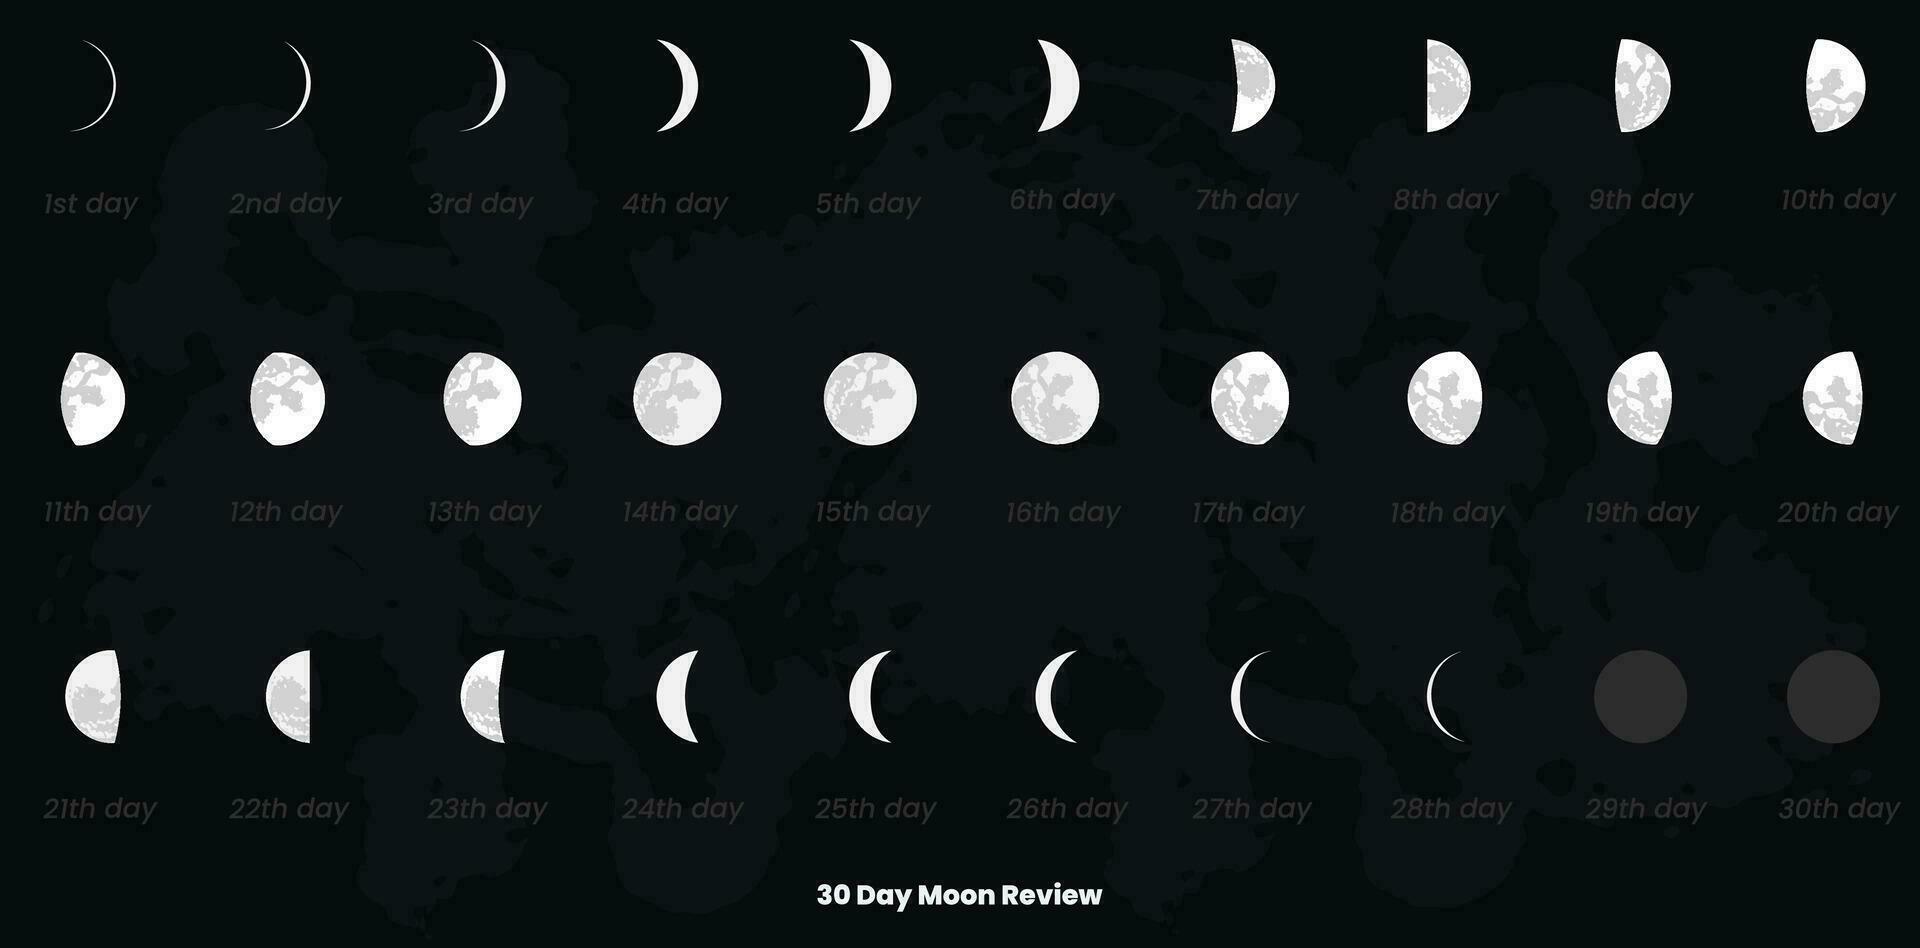 30 day moon phases and moon calendar vector